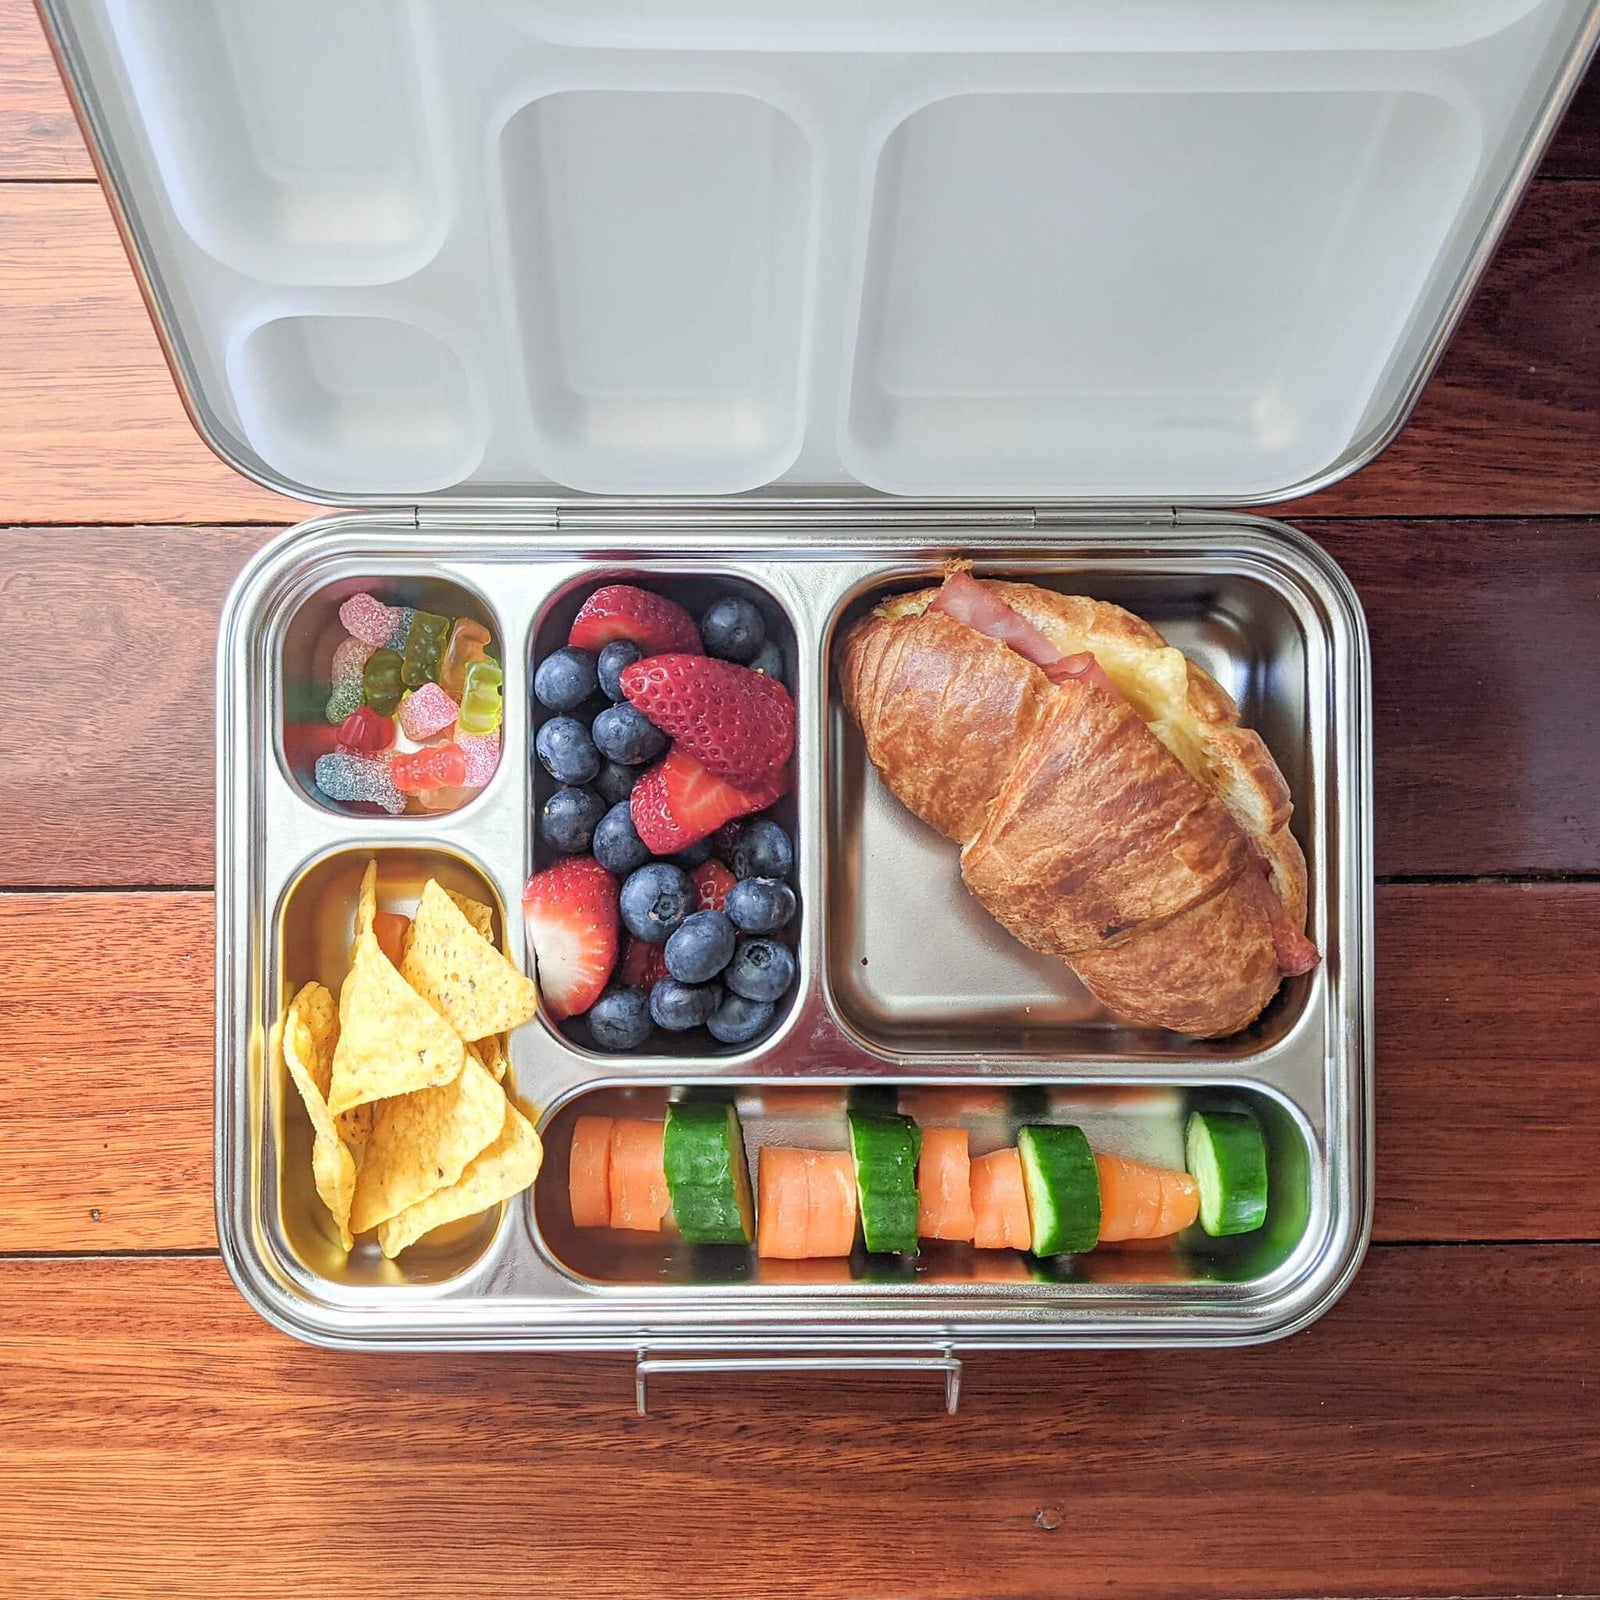 Why Get Yourself a Bento Lunch Box - 5 Benefits to Enjoy - Ecococoon UK